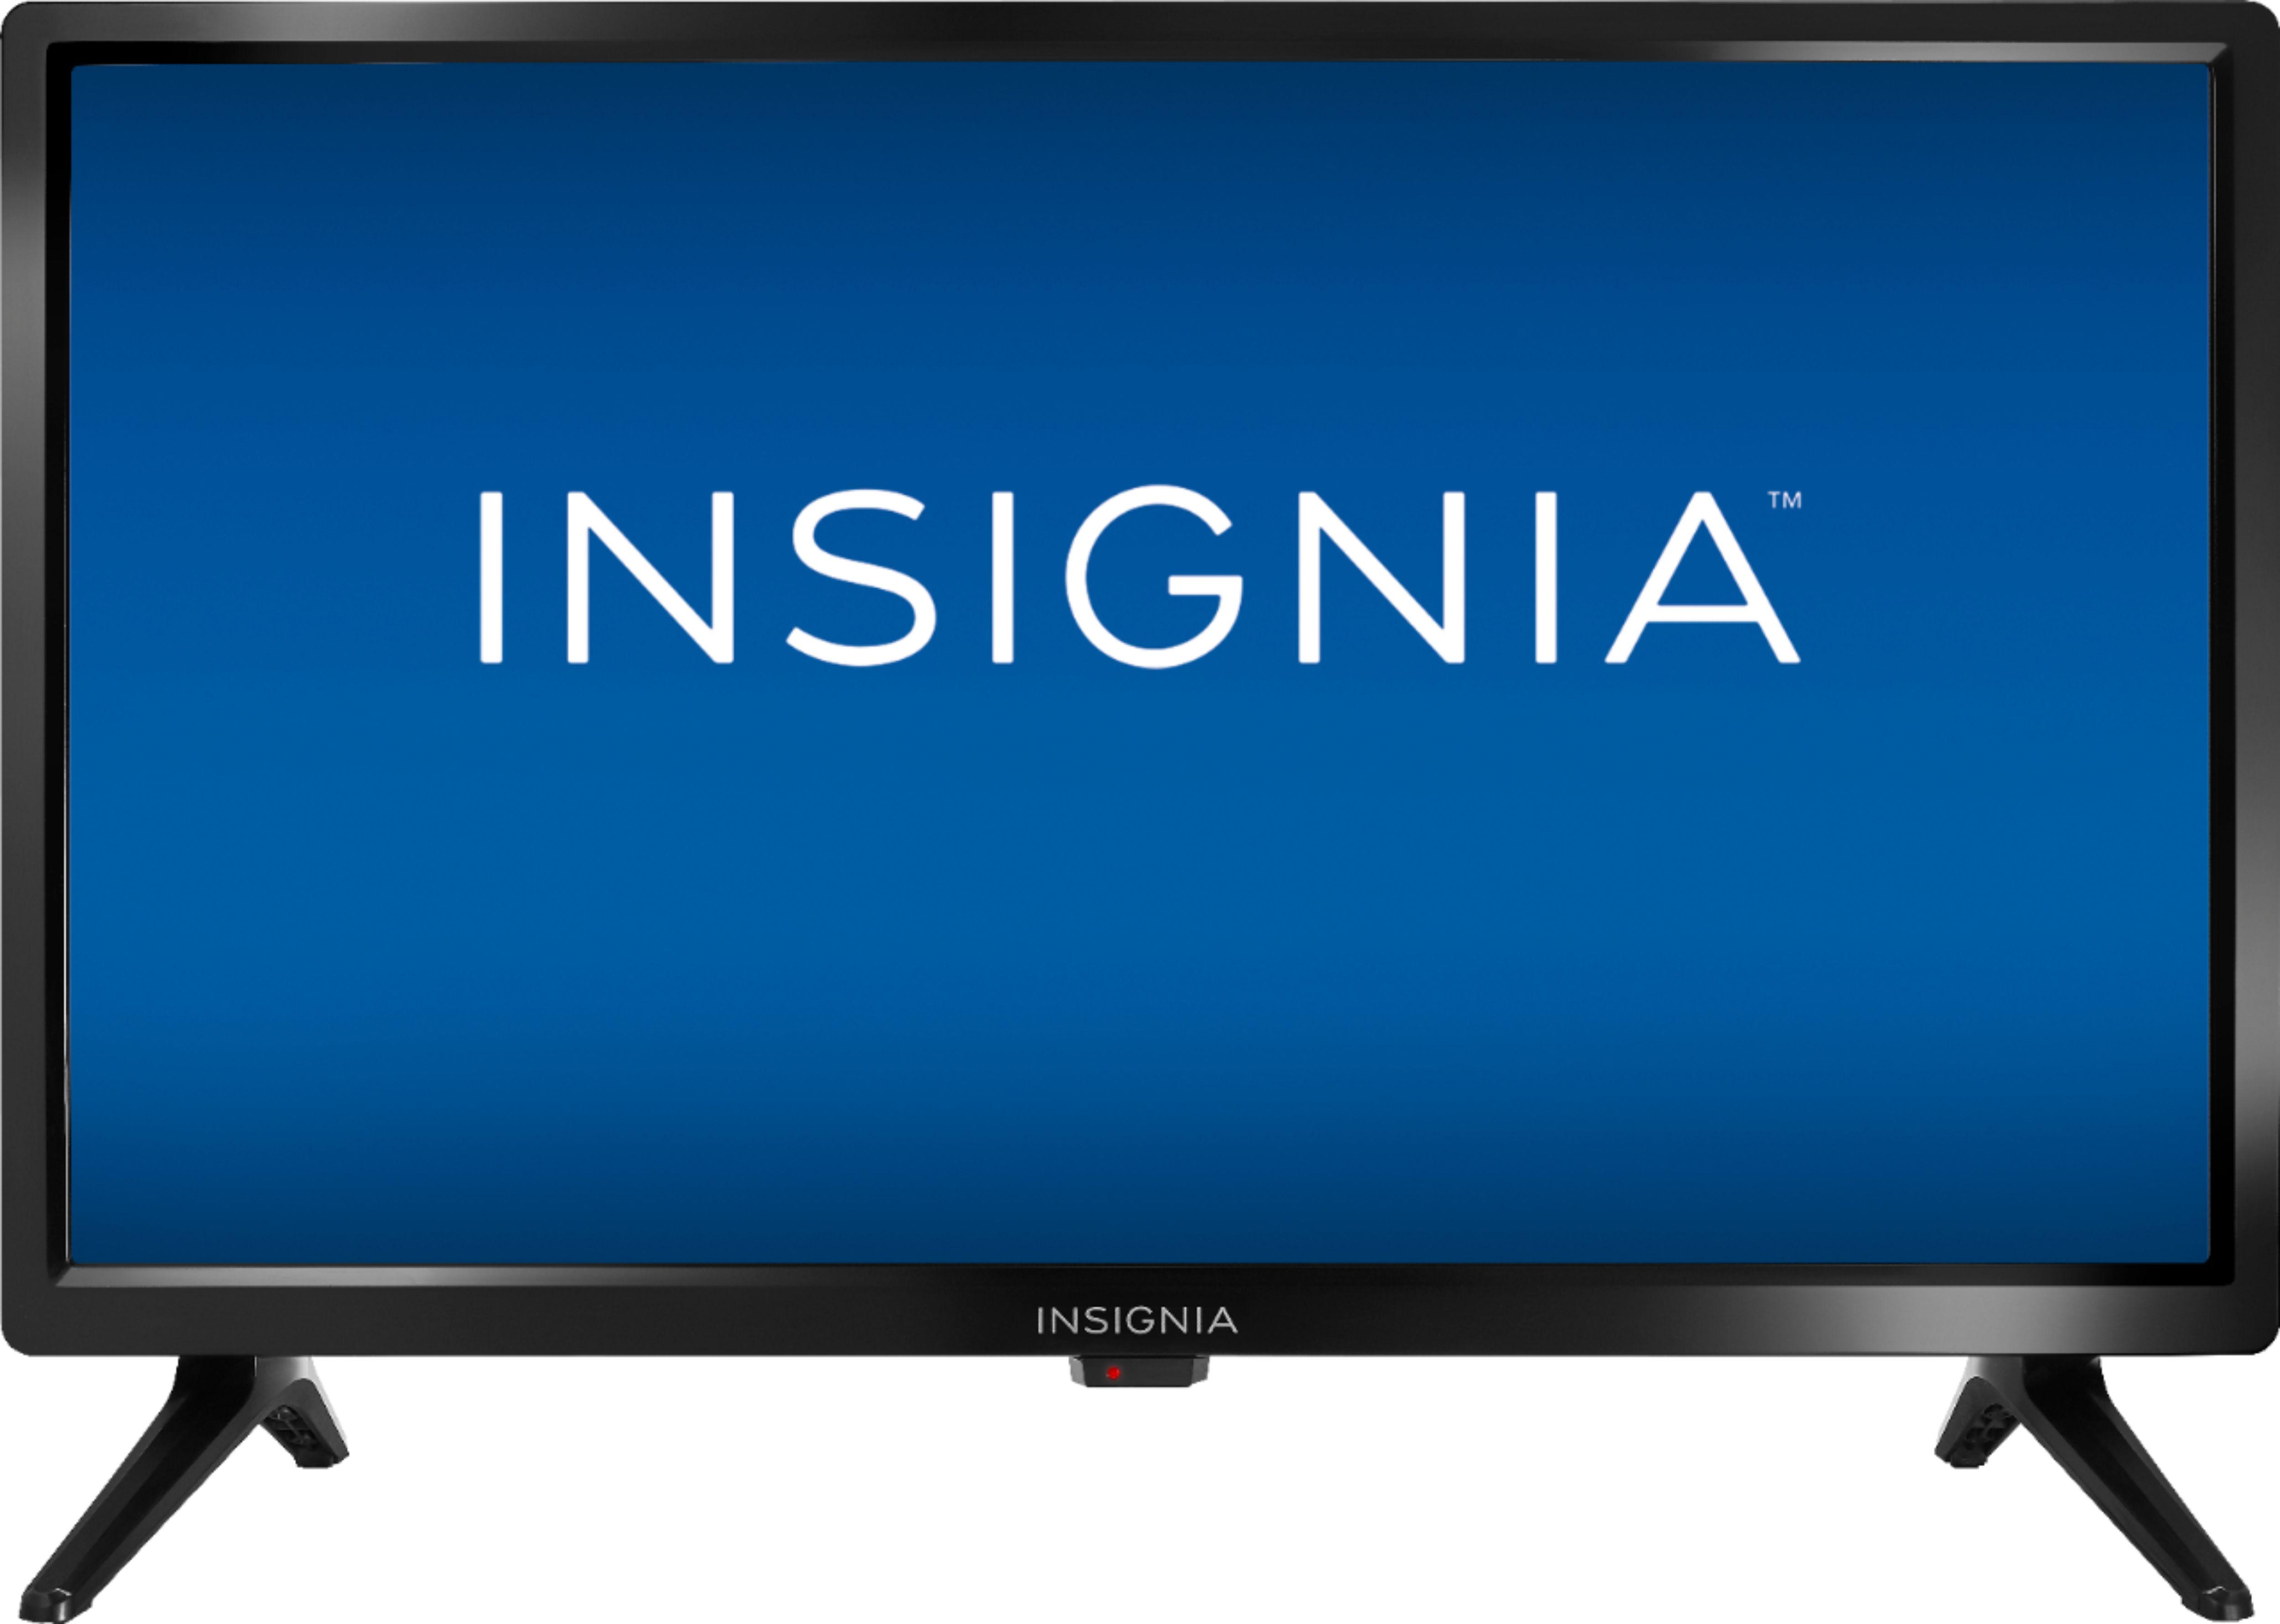 Insignia 19in Class LED HDTV for $69.99 Shipped